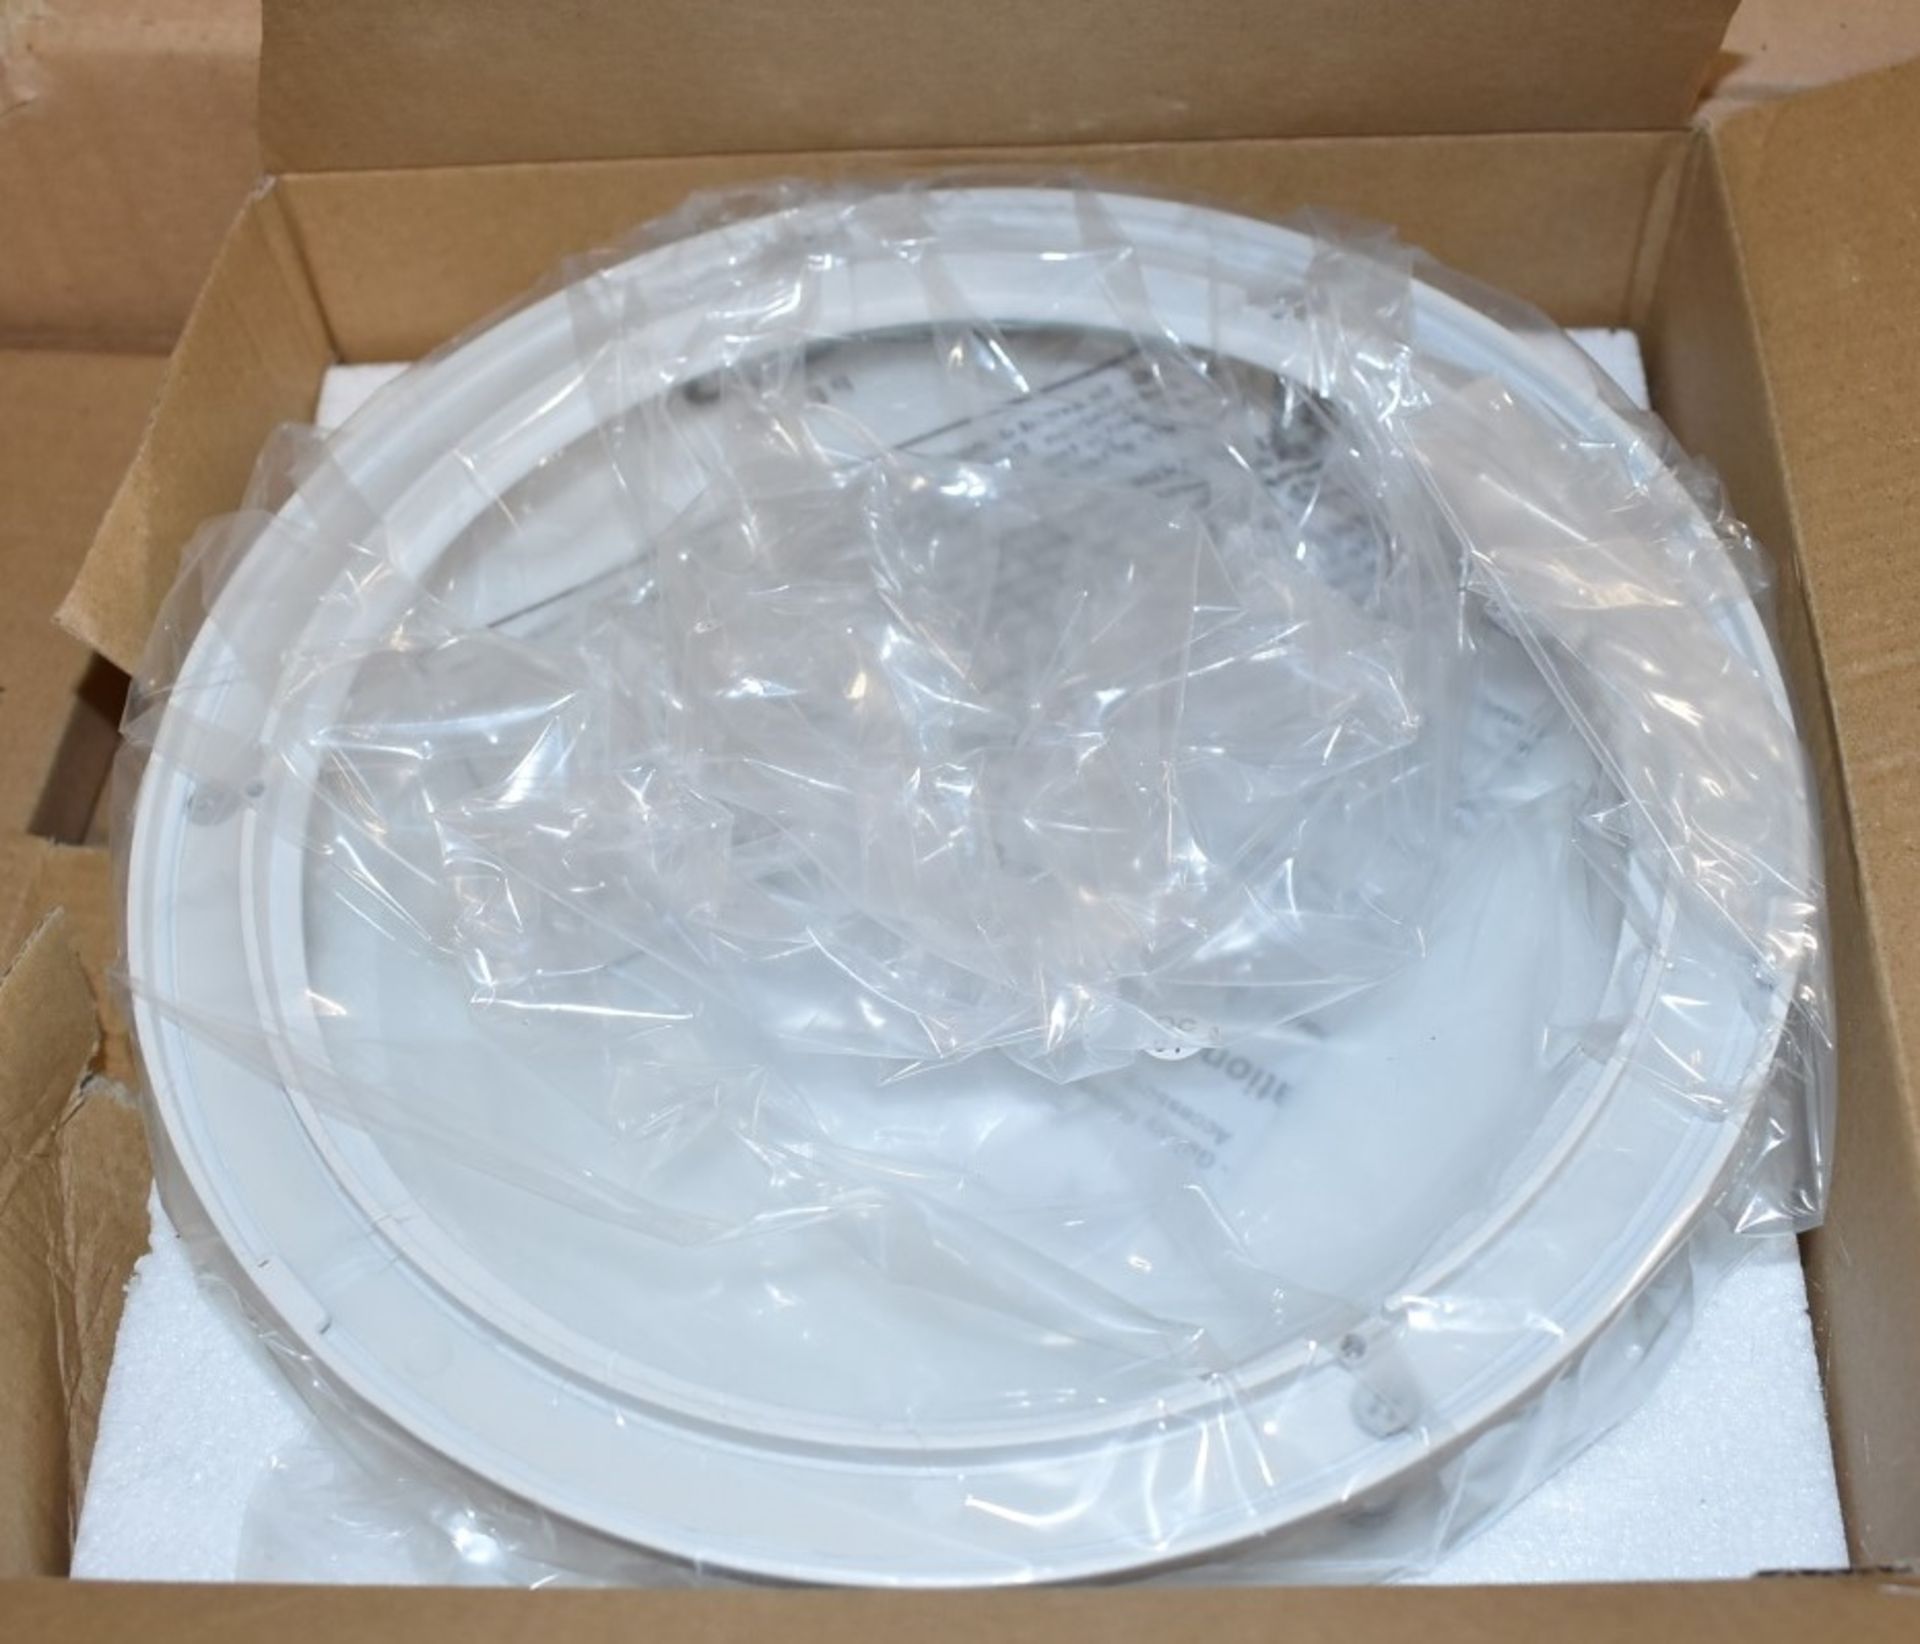 6 x Ansell Lighting AGPL/DG1/W Galaxy White Trim Bezels With Frosted Clear Glass For Downlights - Image 3 of 5